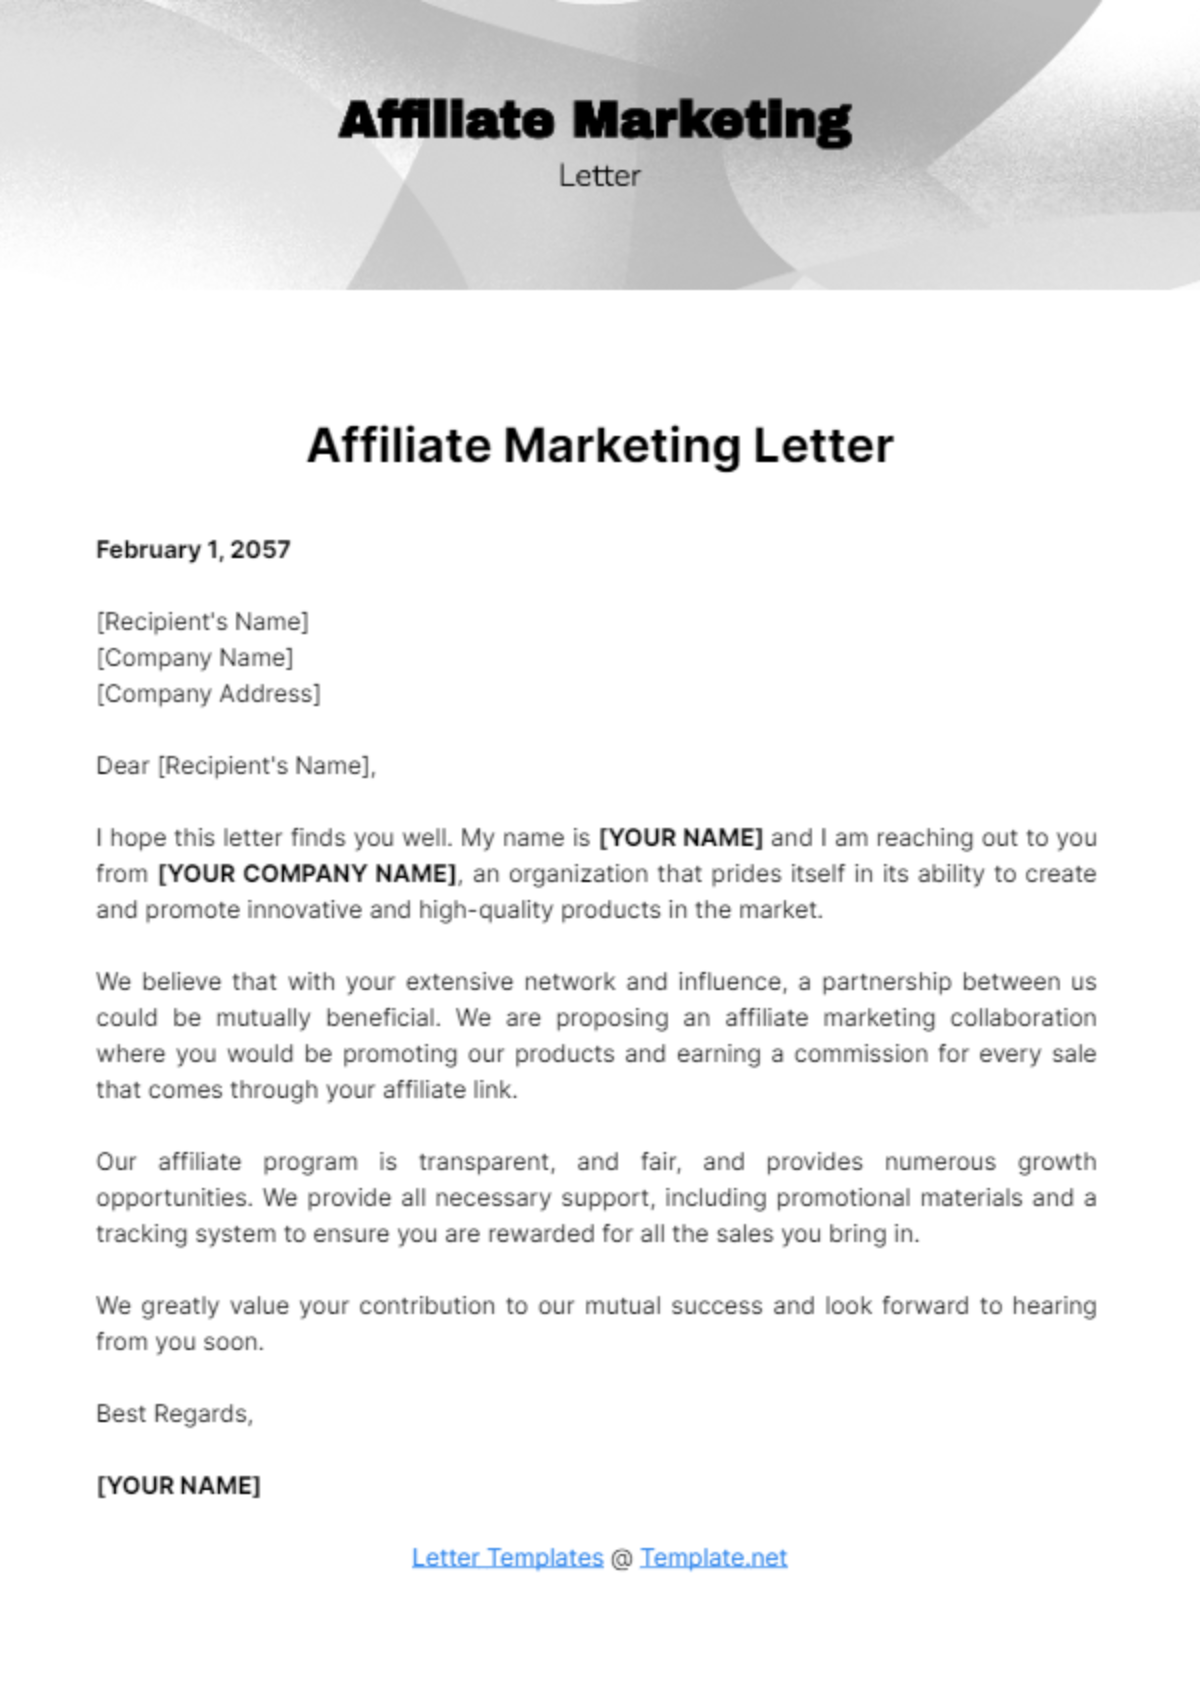 Affiliate Marketing Letter Template